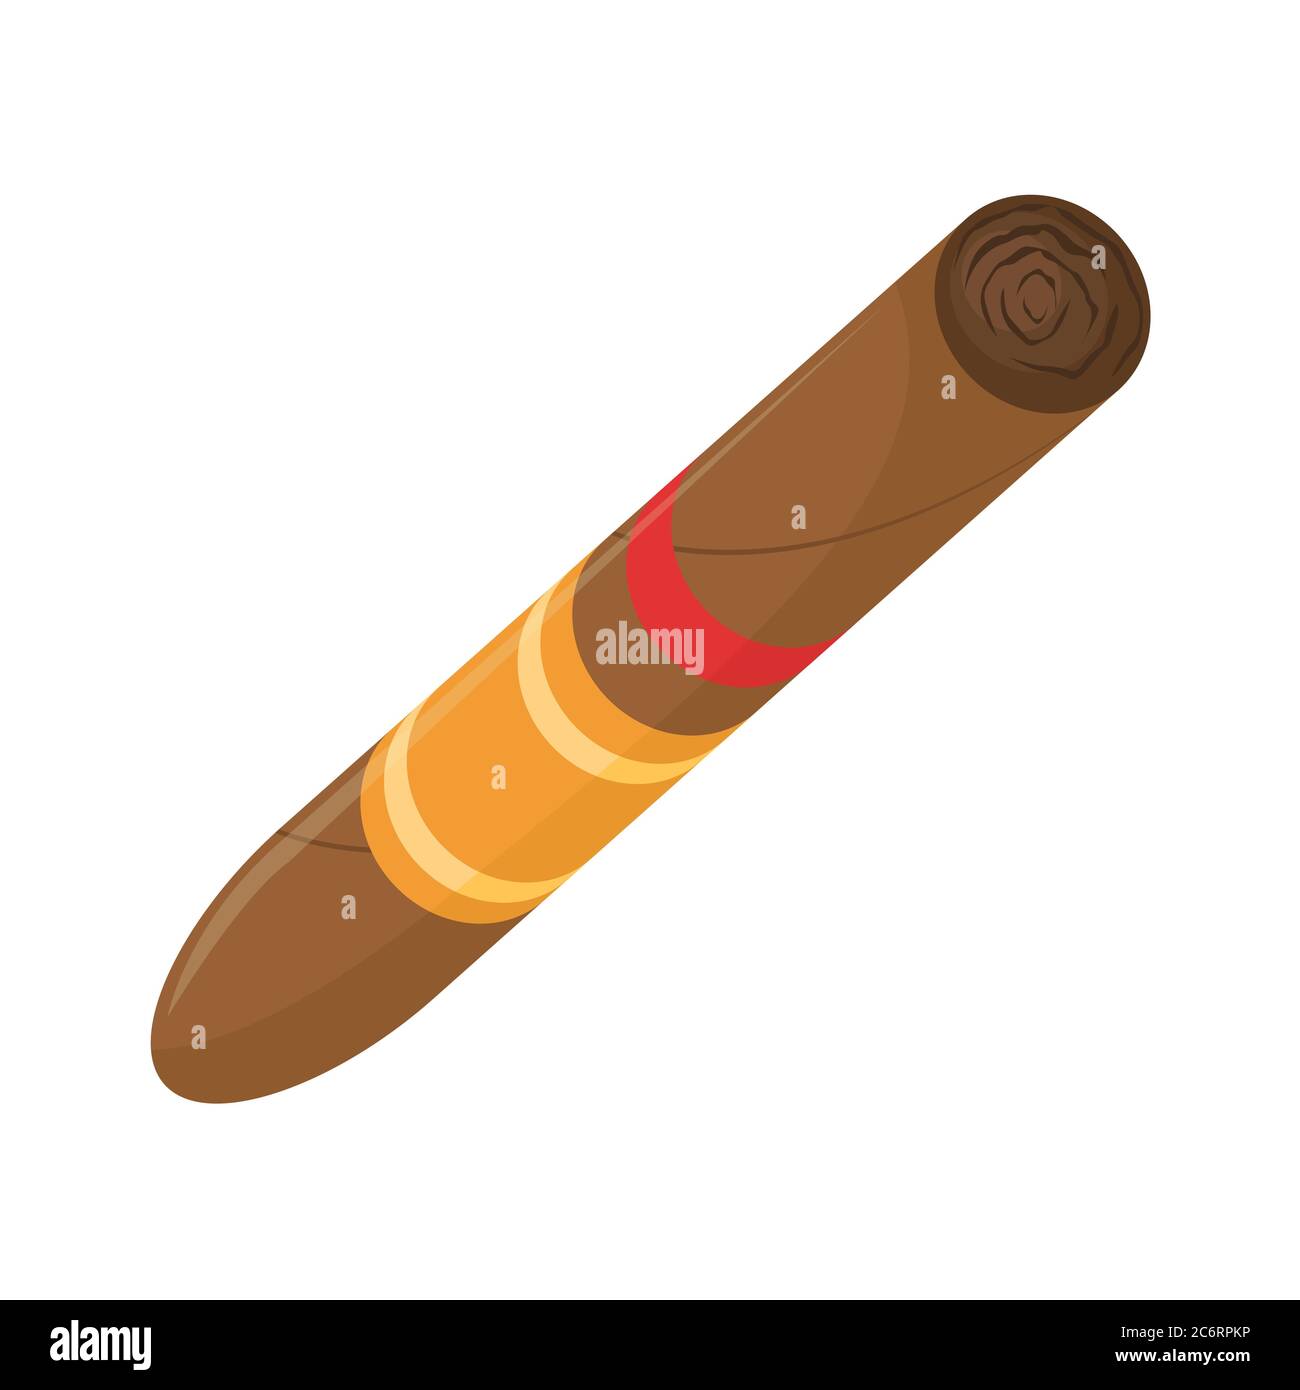 Flat vector illustration of a Cuban cigar with a label. Stock Vector